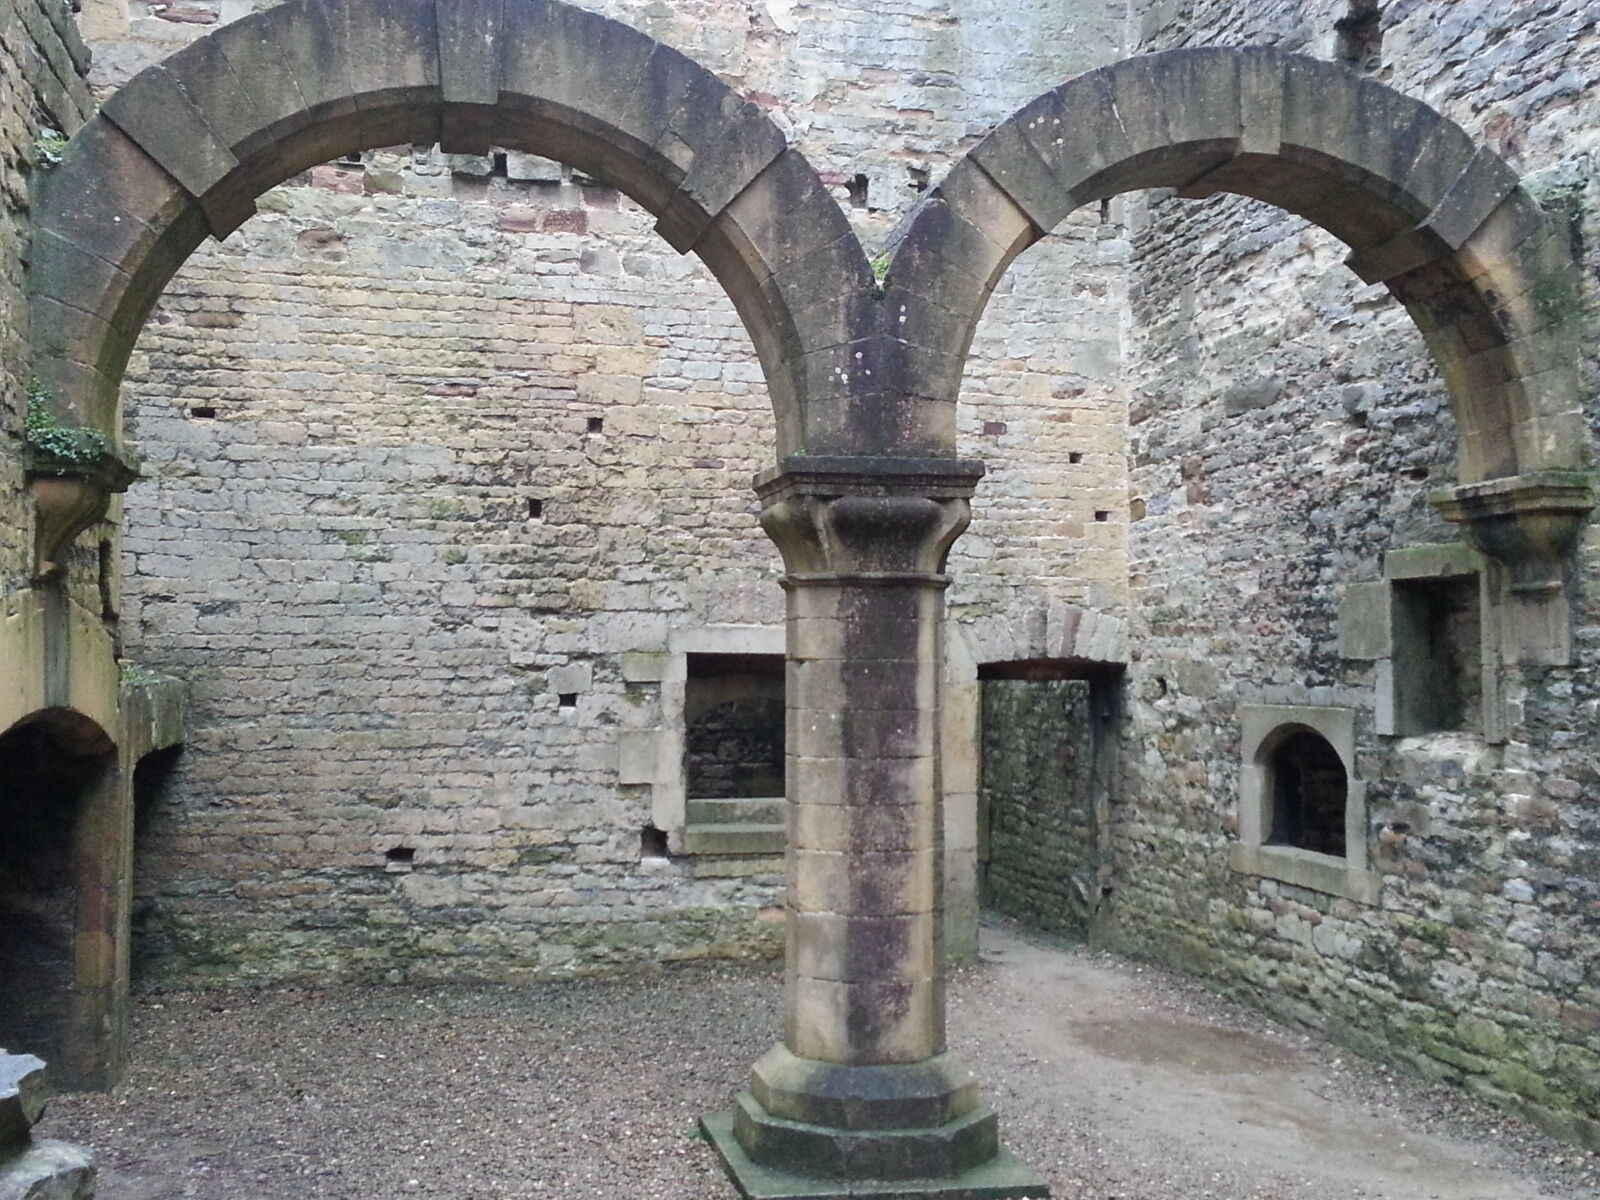 Samsung Galaxy S3 sample photo. Arches, building, castle, doorway photography